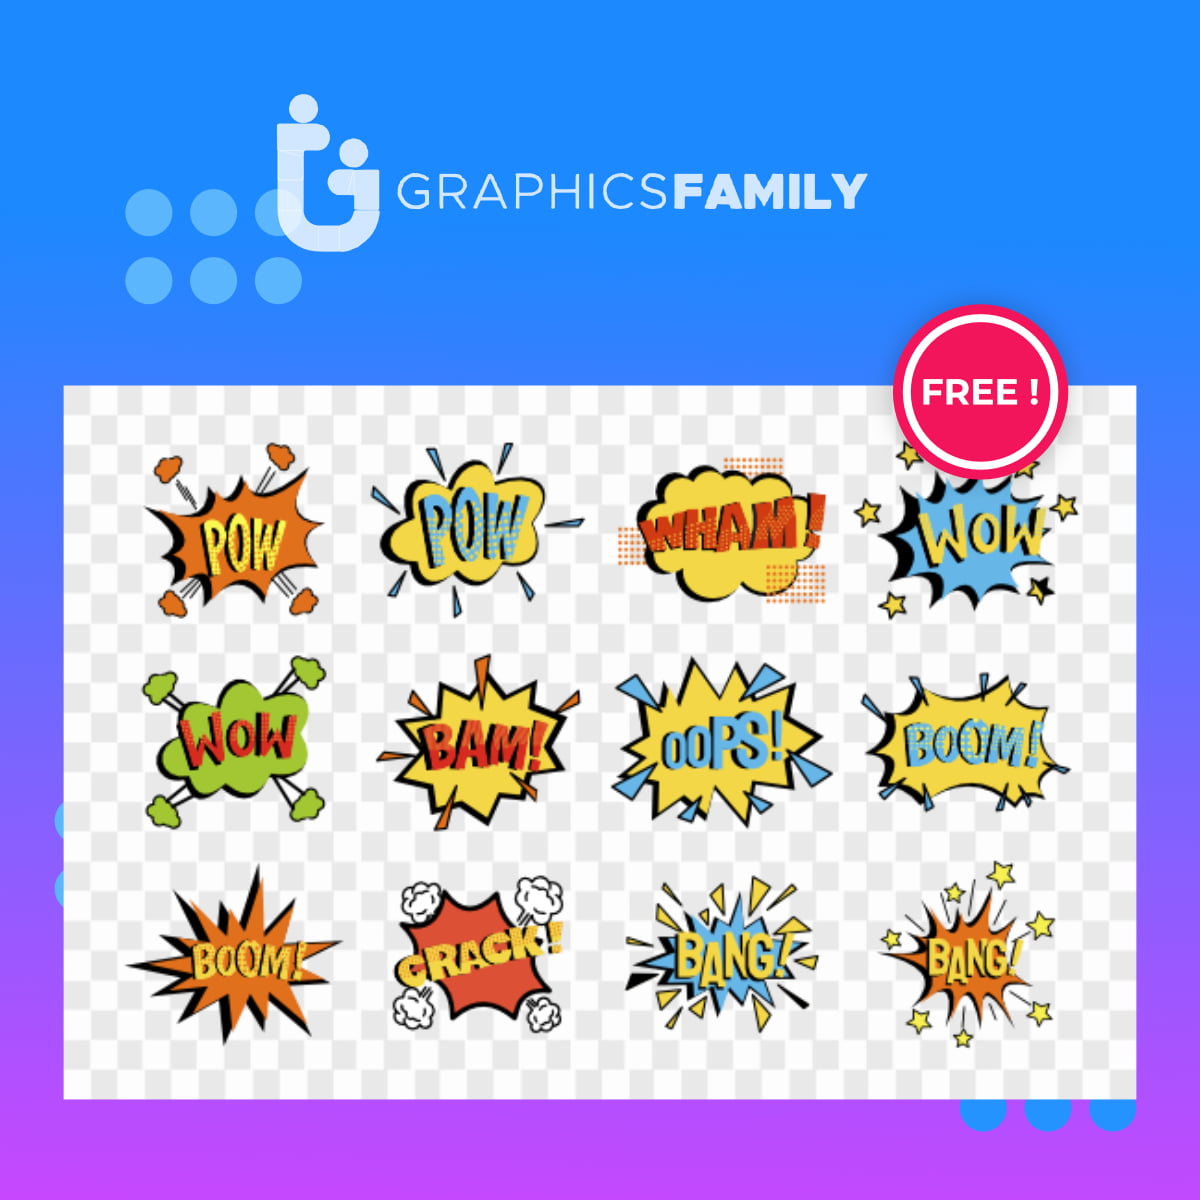 Chat balloon Stickers - Free education Stickers